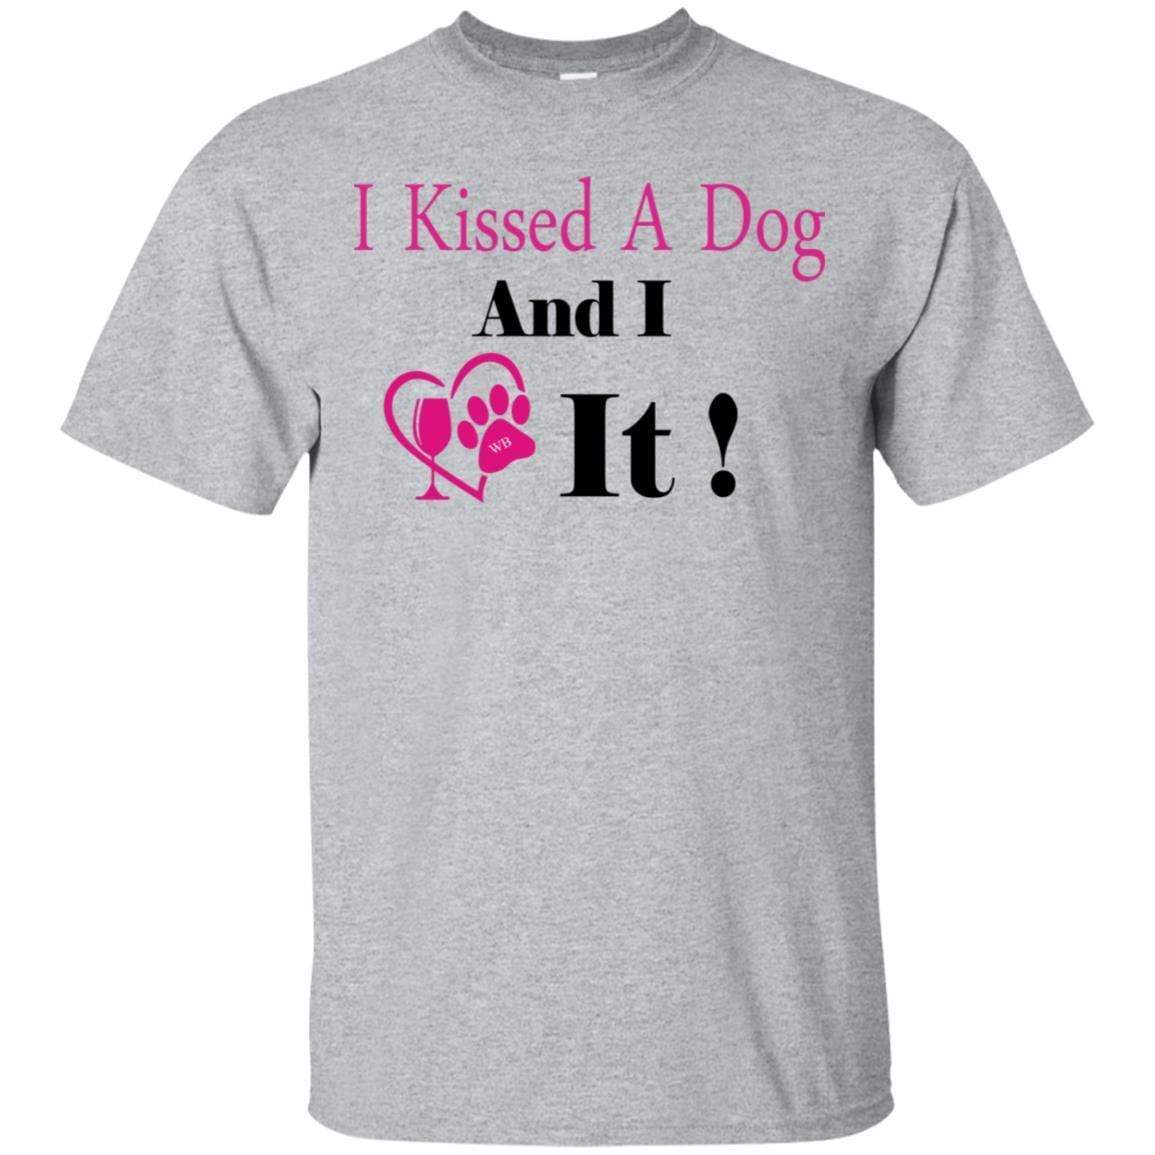 T-Shirts Sport Grey / S WineyBitches.co "I Kissed A Dog And I Loved It:" Ultra Cotton T-Shirt WineyBitchesCo